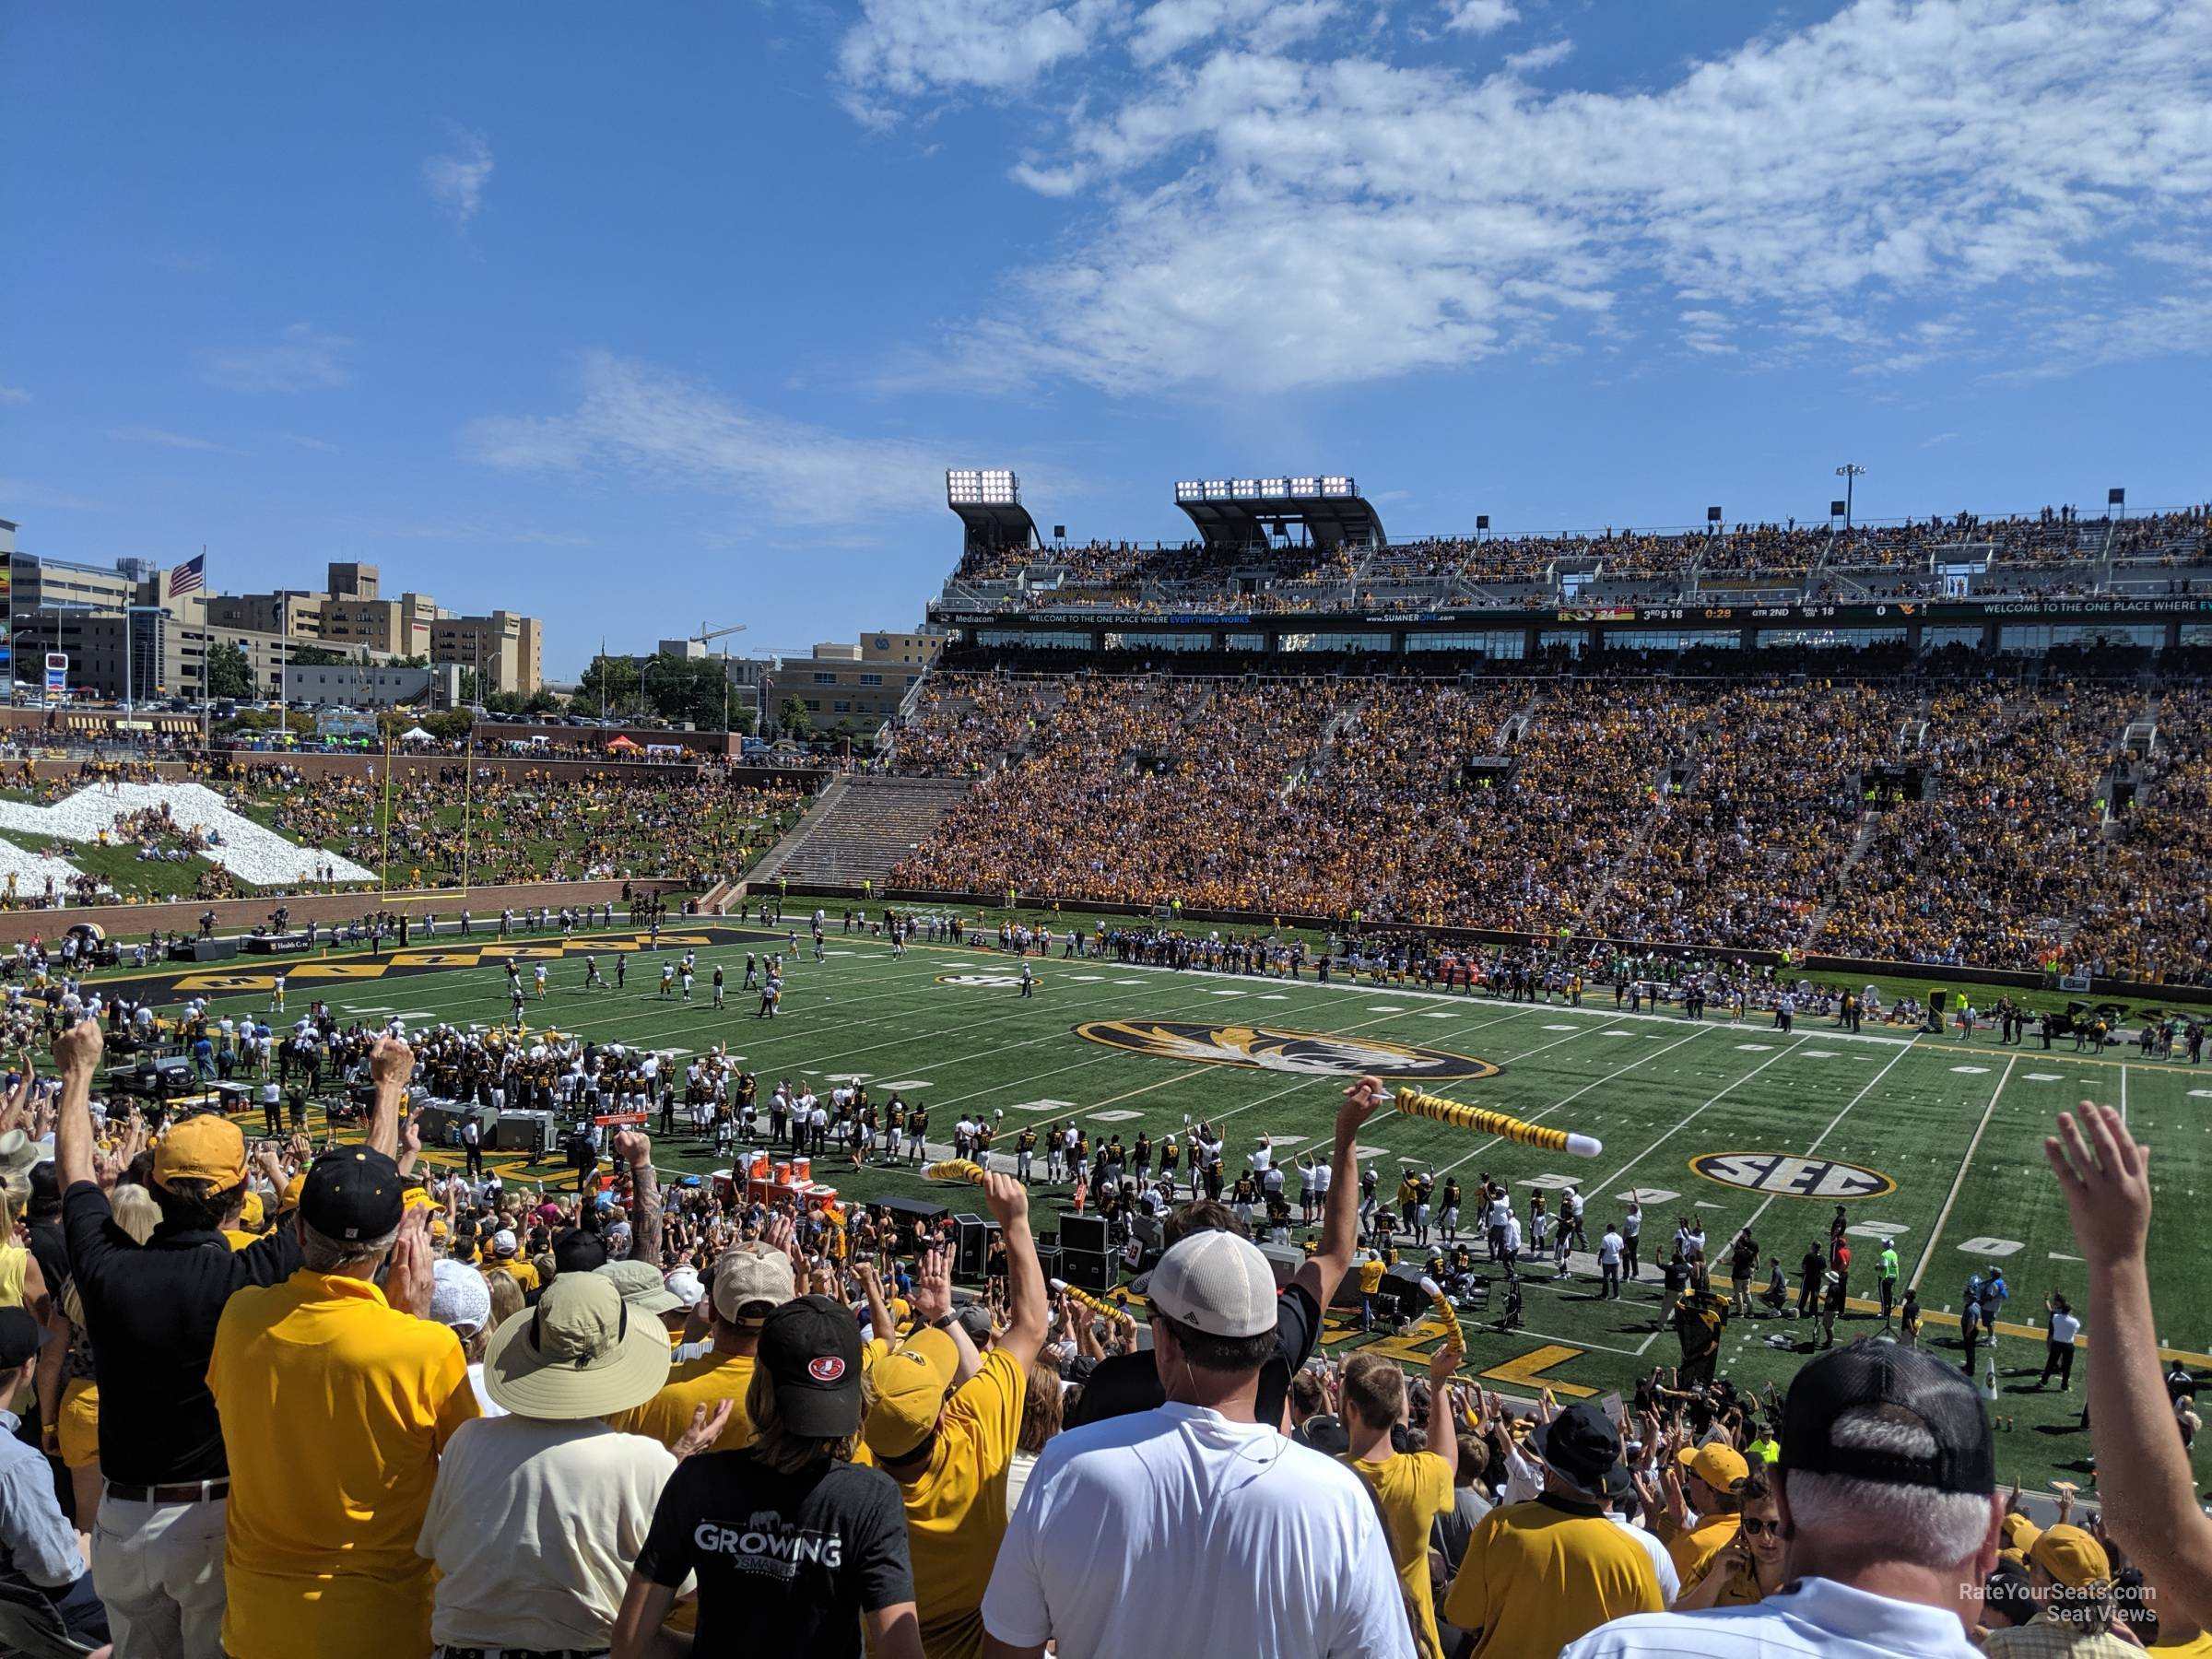 section 123, row 38 seat view  - faurot field